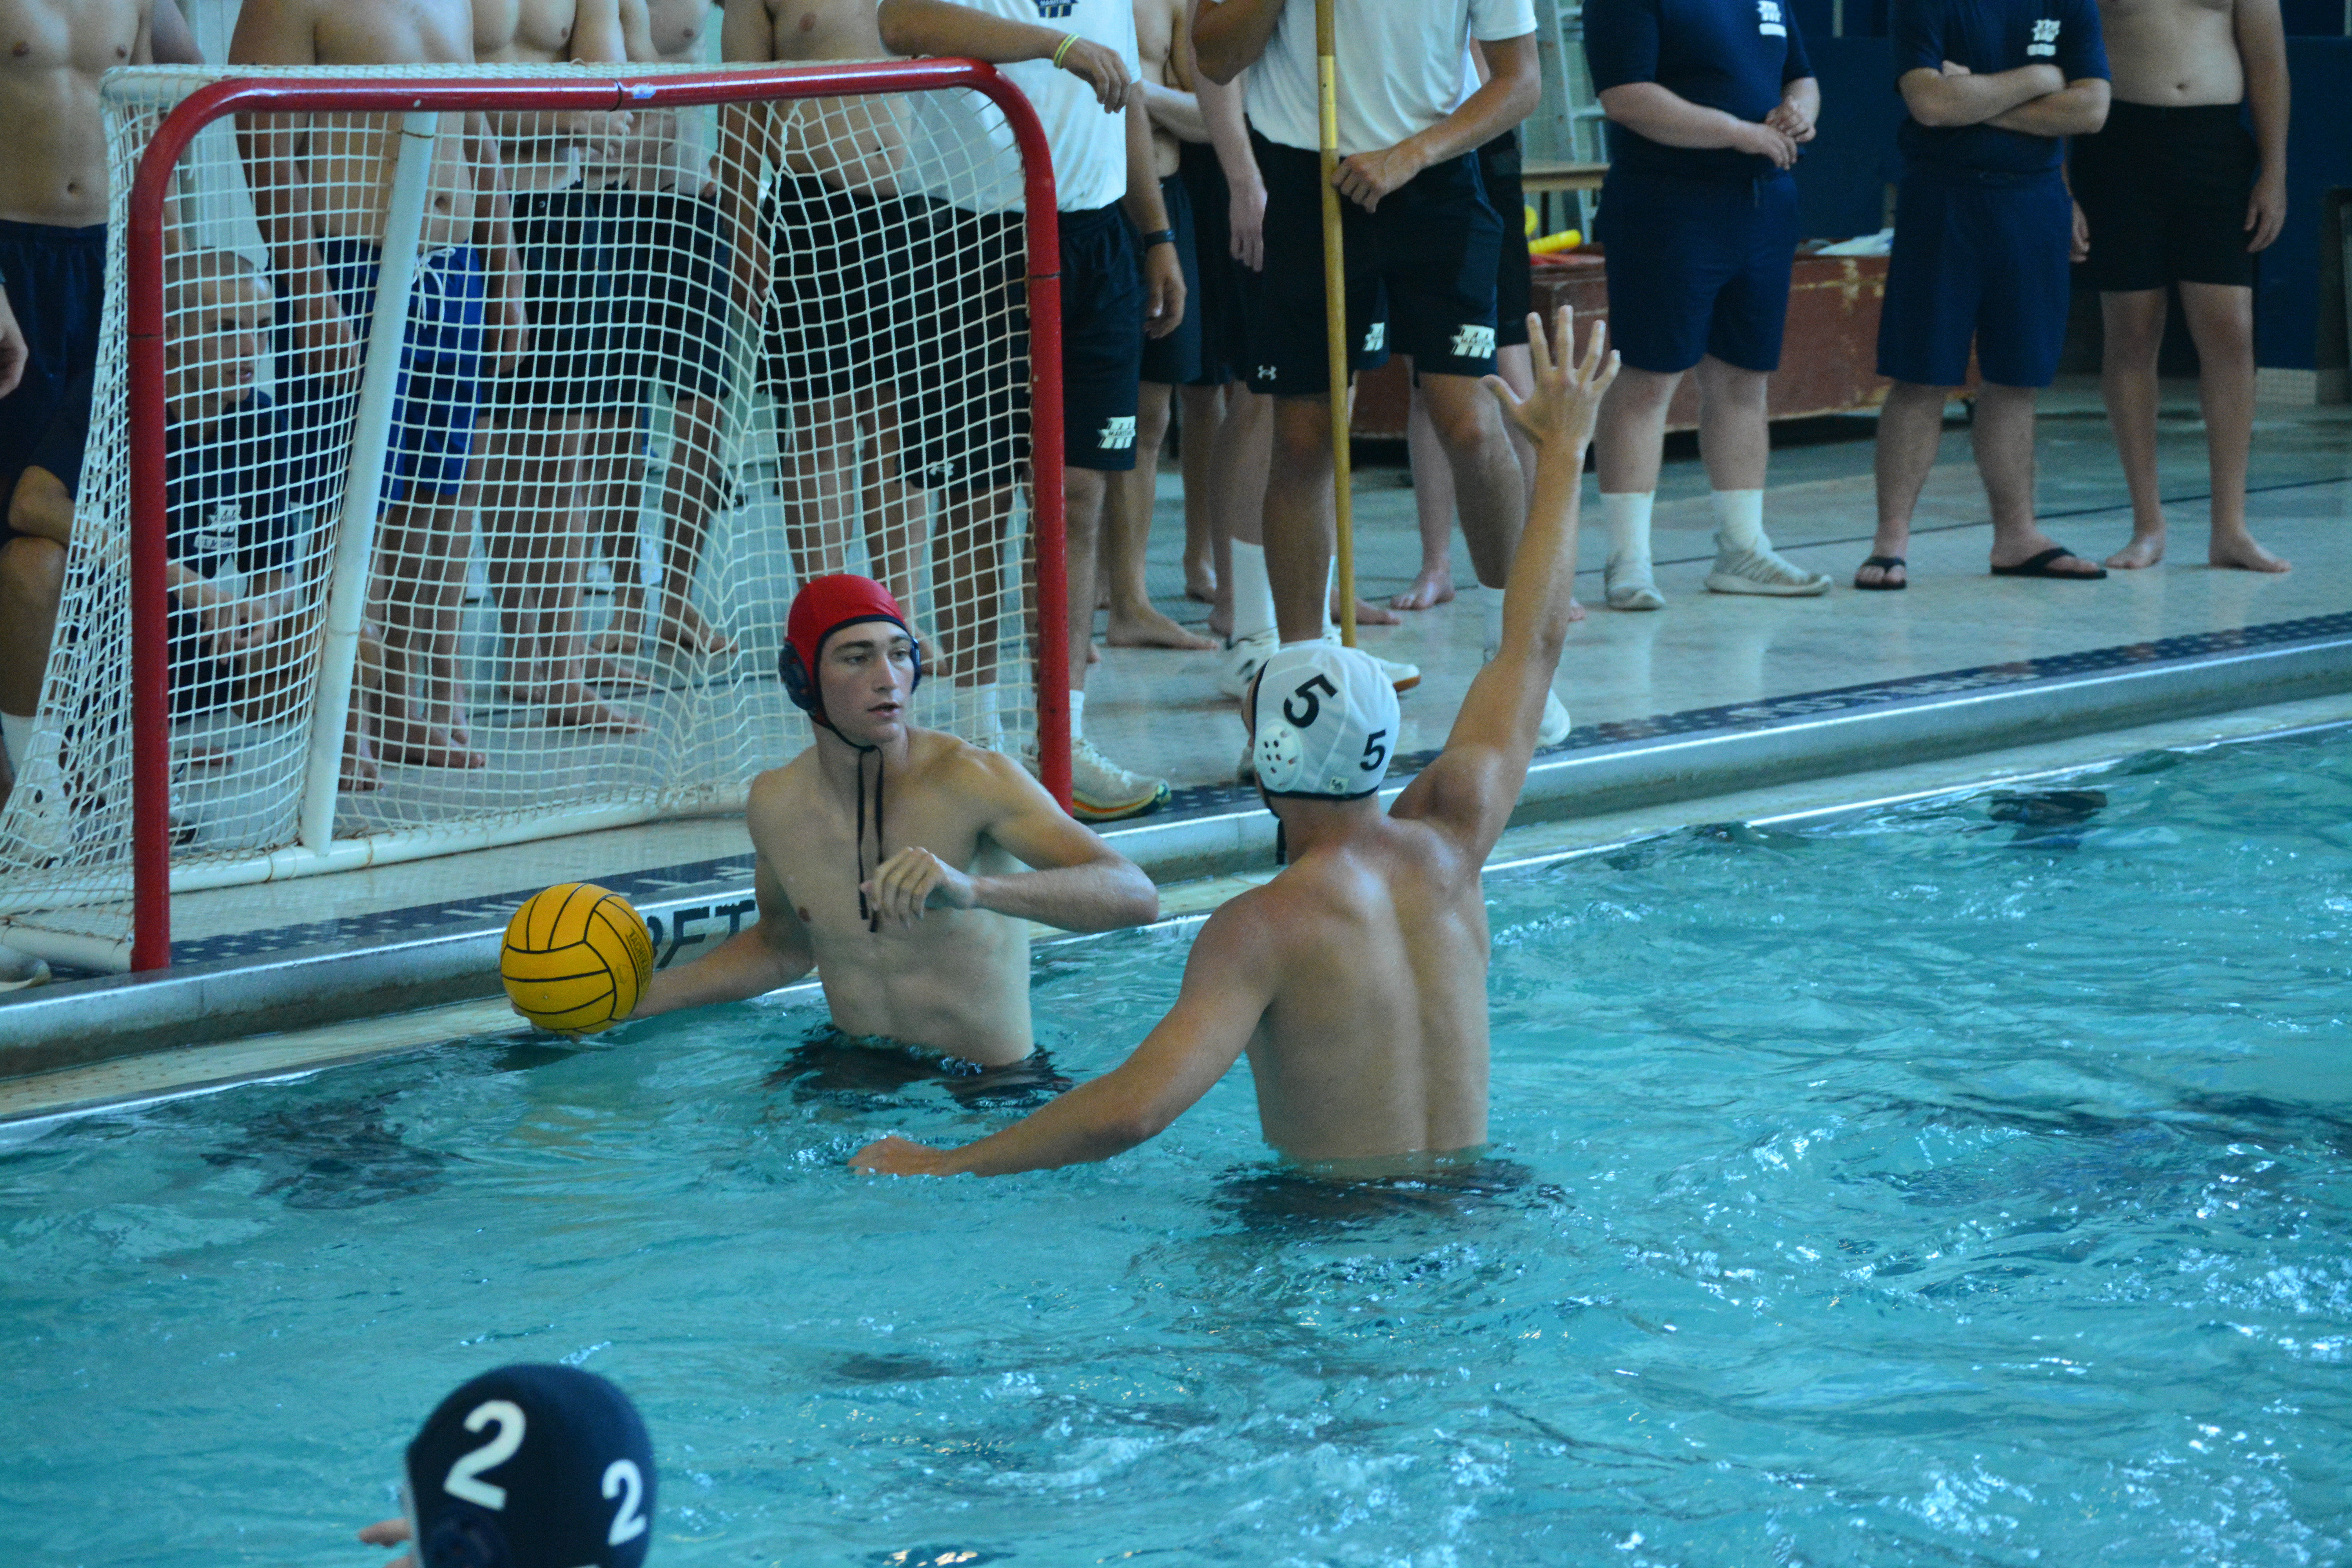 A heated match of water polo!